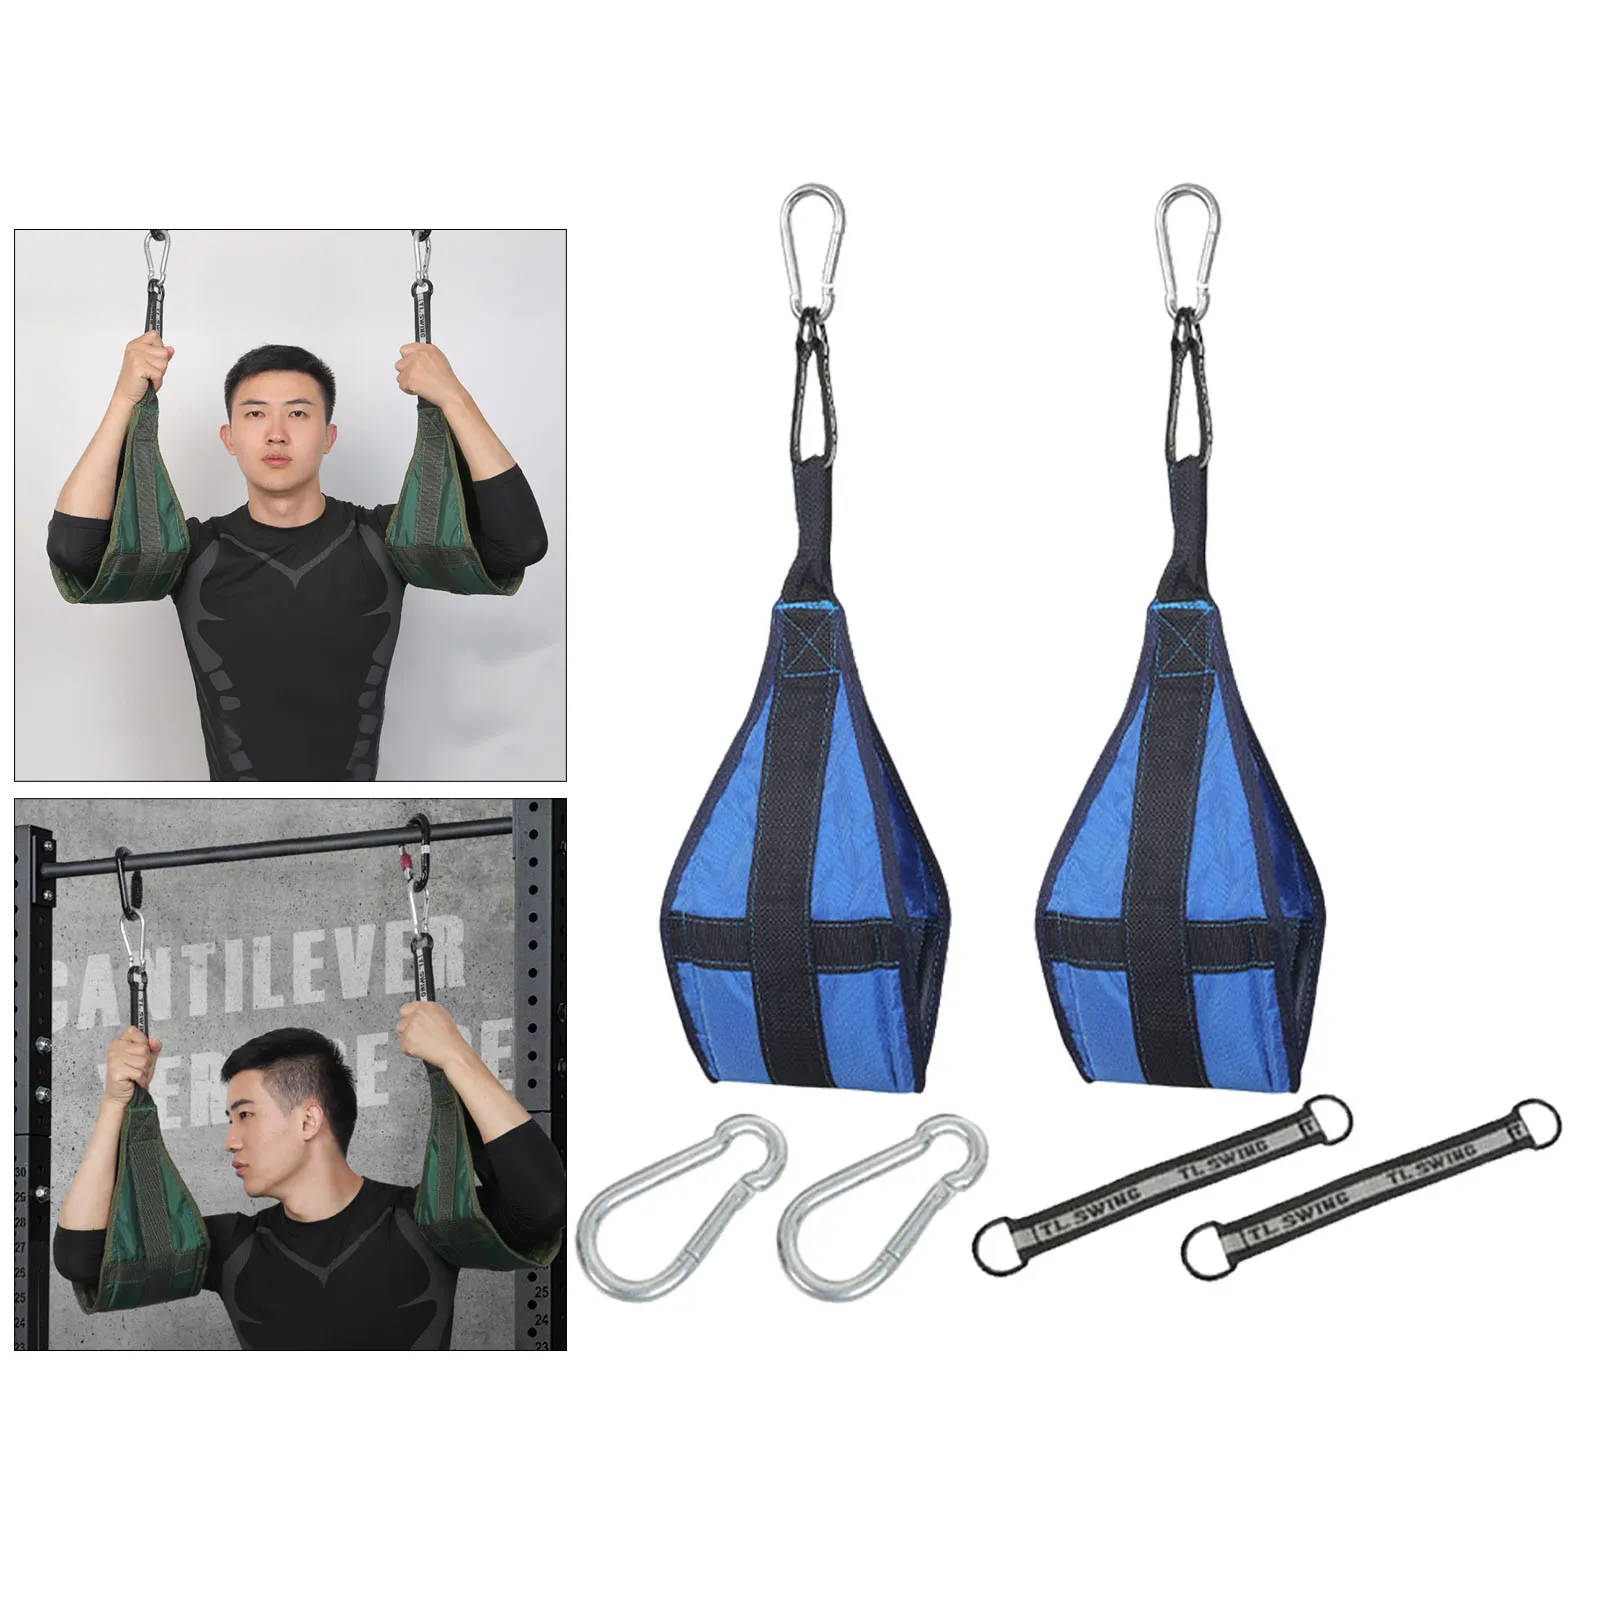 Fitness Ab Straps Exercising Gear Hanging Hanging Ab Straps Ab Strap for Men and Women Chinning Core Strength Bar Gym